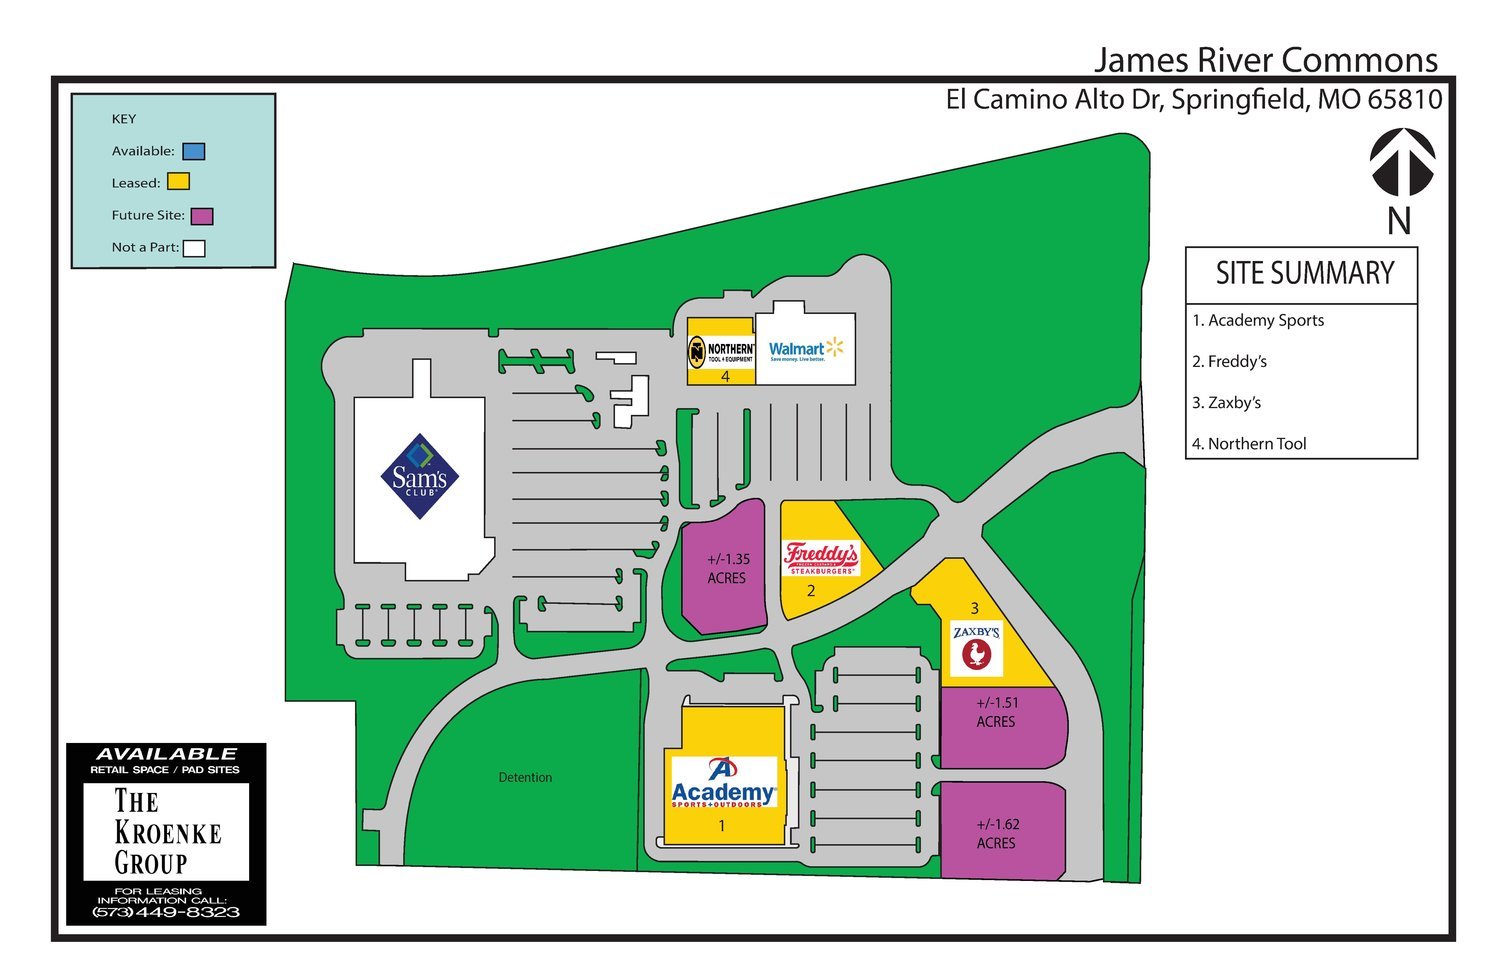 James River Commons has three spaces that haven’t been claimed.